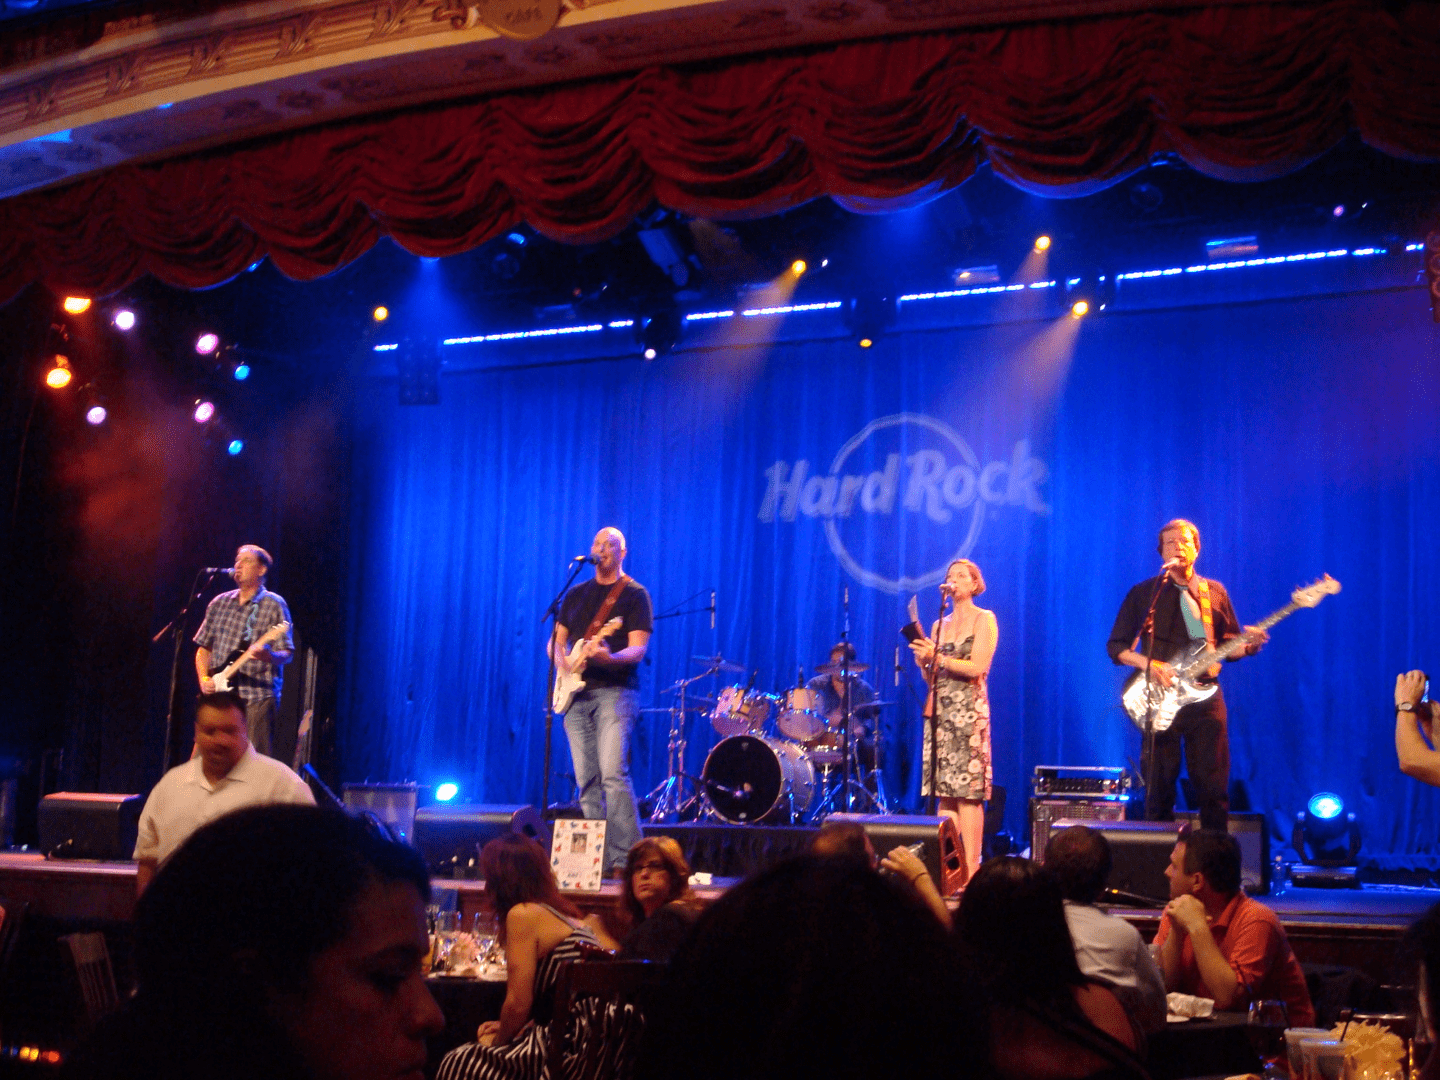 A band performing on stage at a concert.